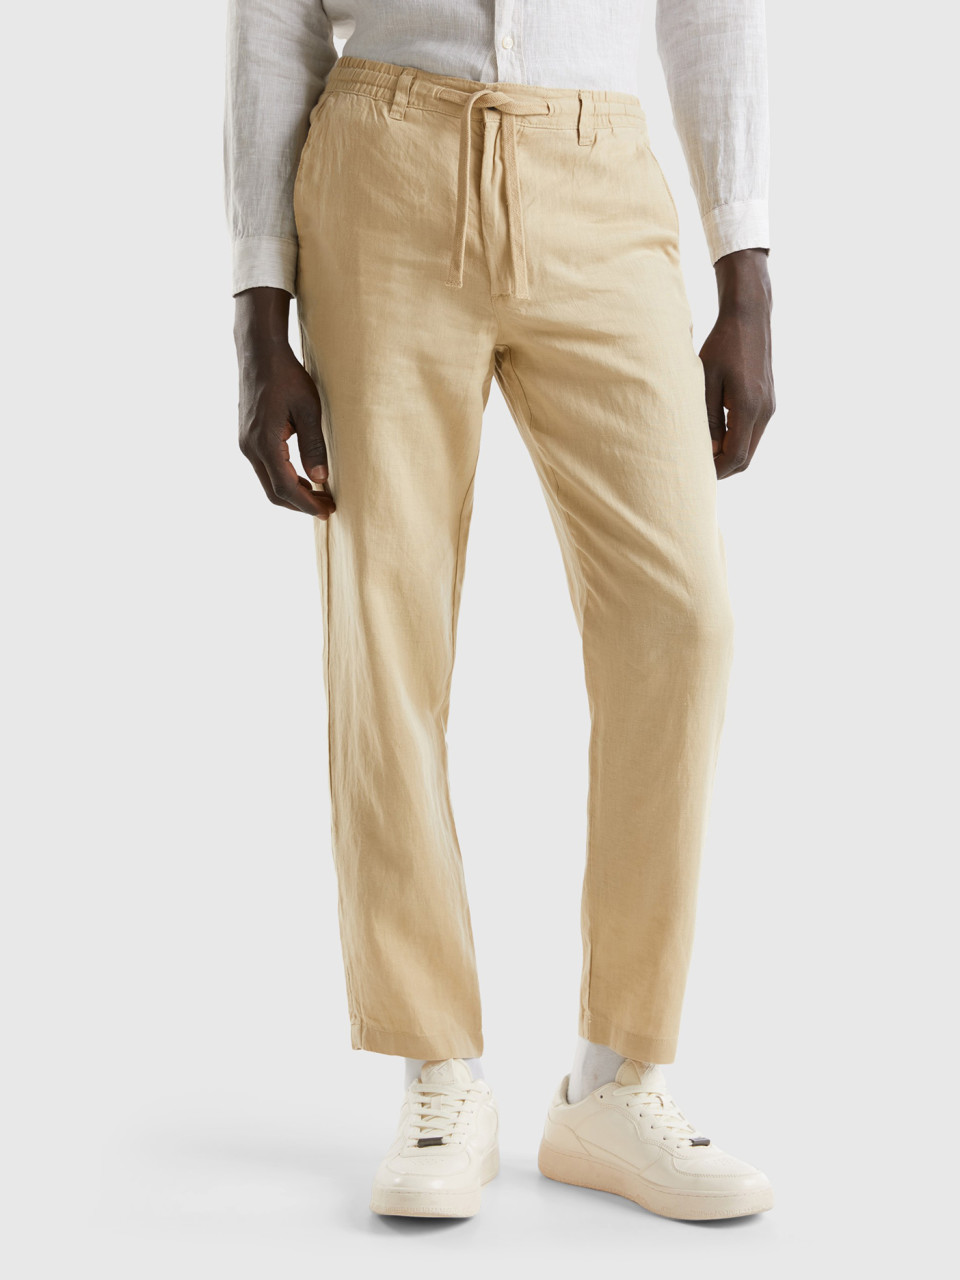 Benetton, Trousers In Pure Linen With Drawstring, Beige, Men